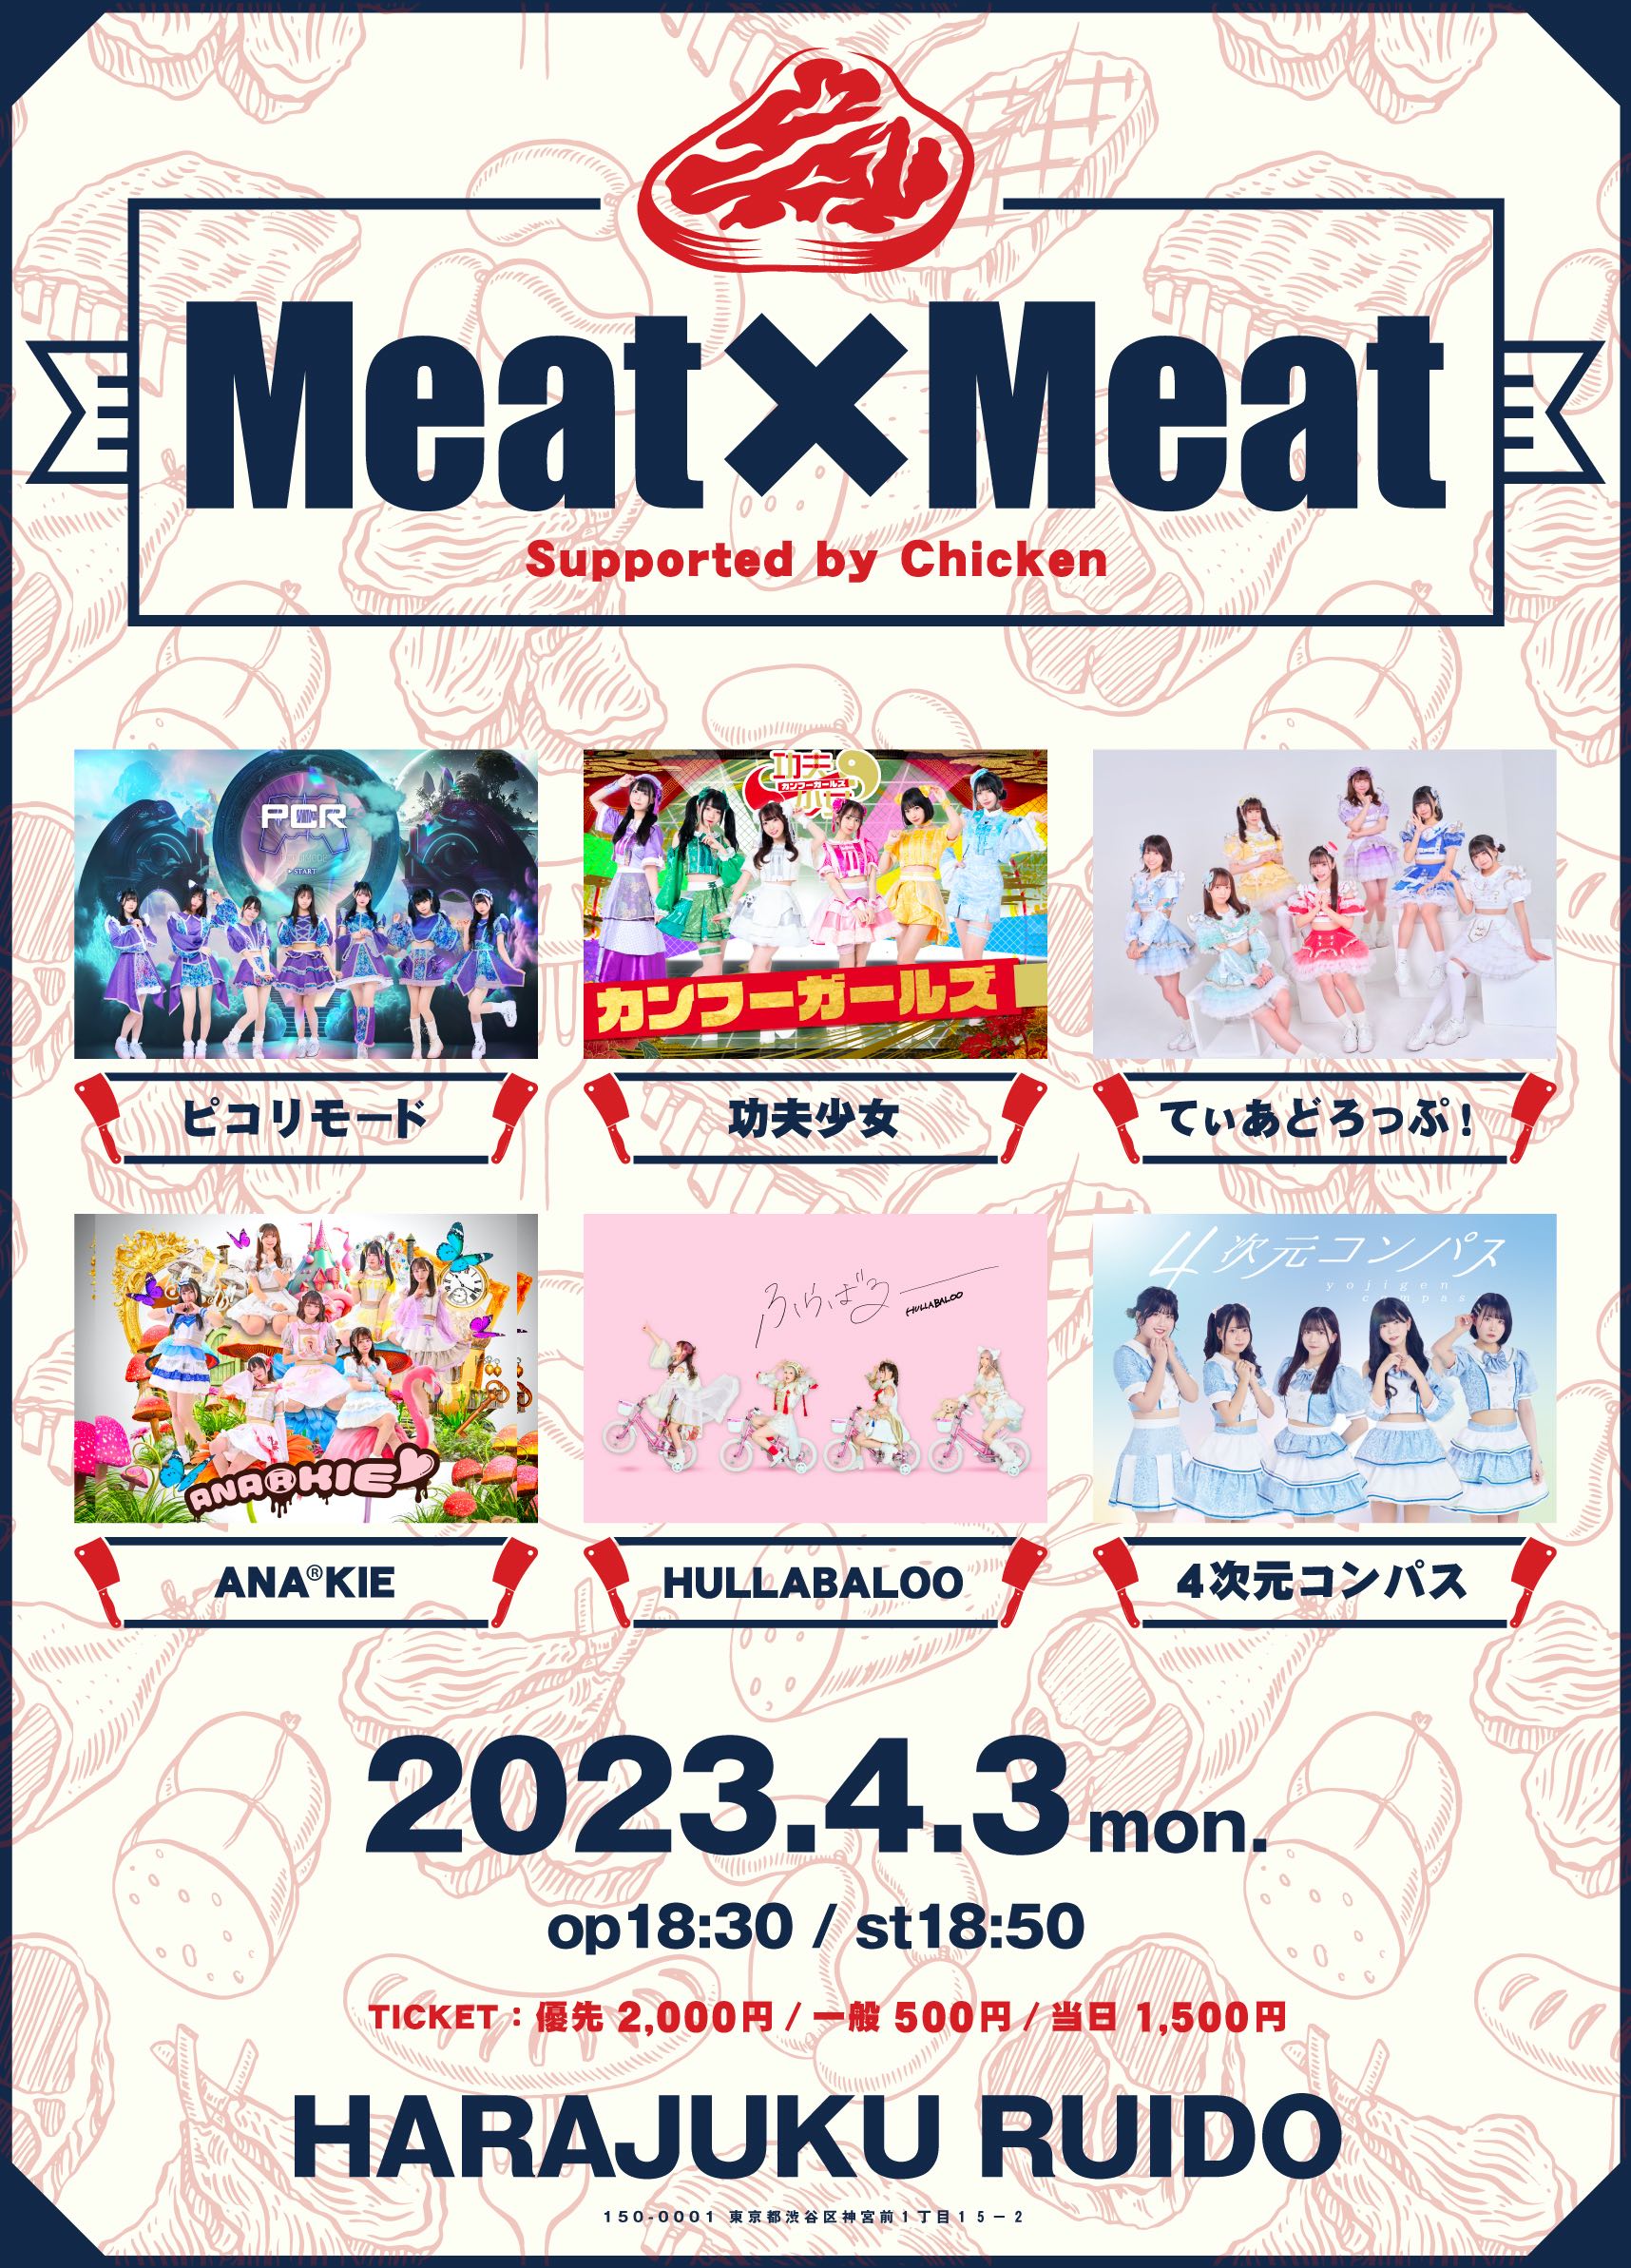 「Meat×Meats Supported by Chicken」